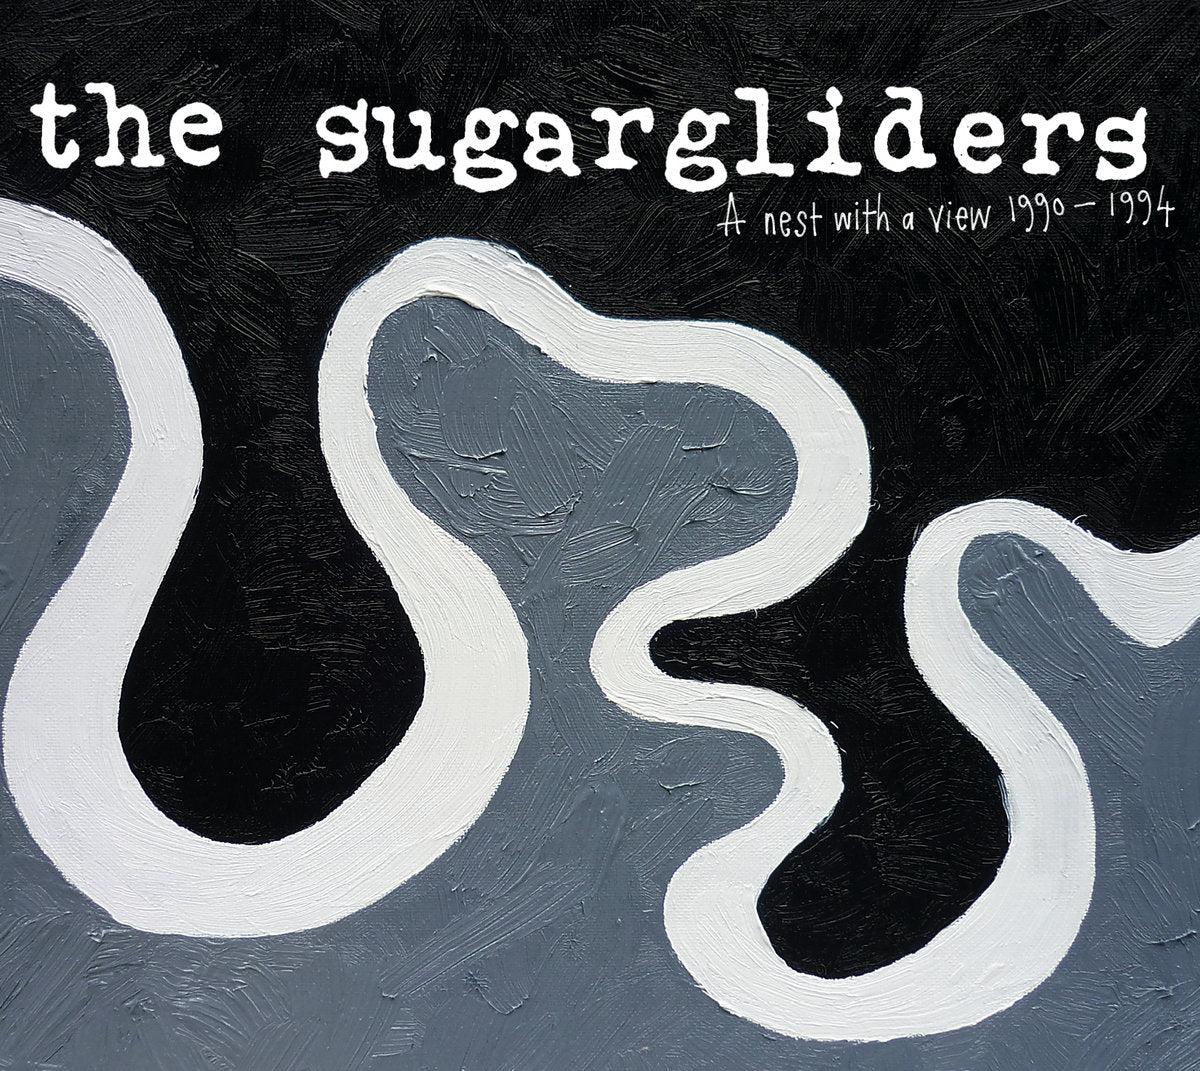 Sugargliders, The - A Nest with a View 1990-1994